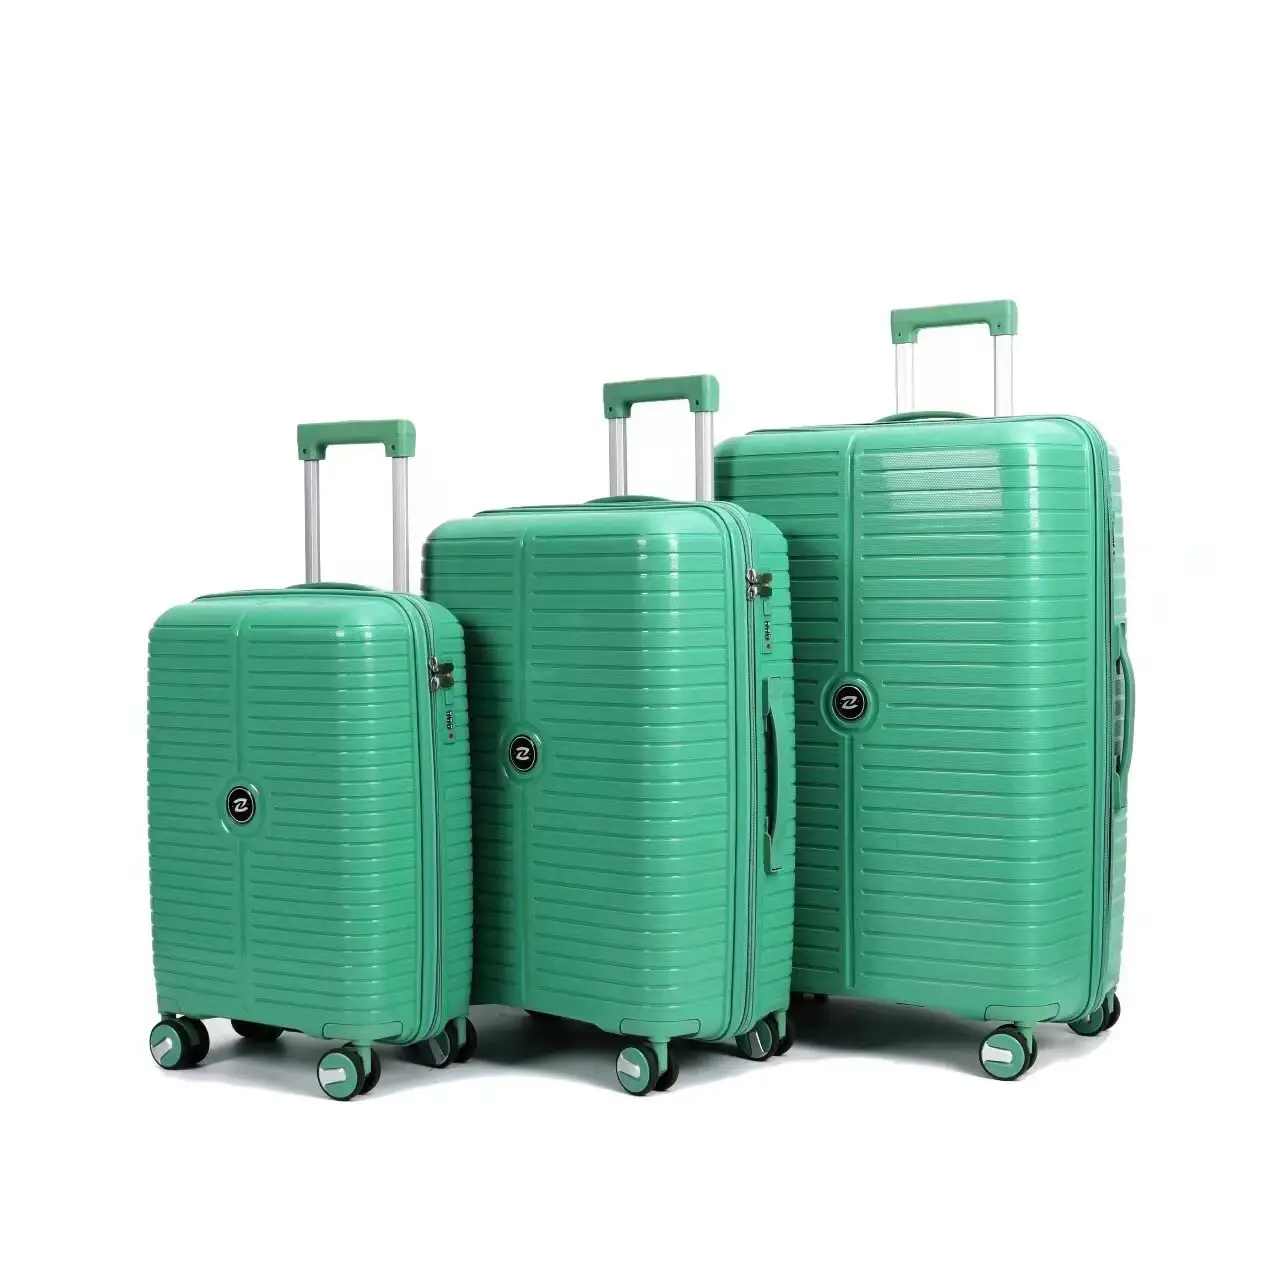 Hot sale high quality PP luggage 3 pcs one set multicolor travel bags